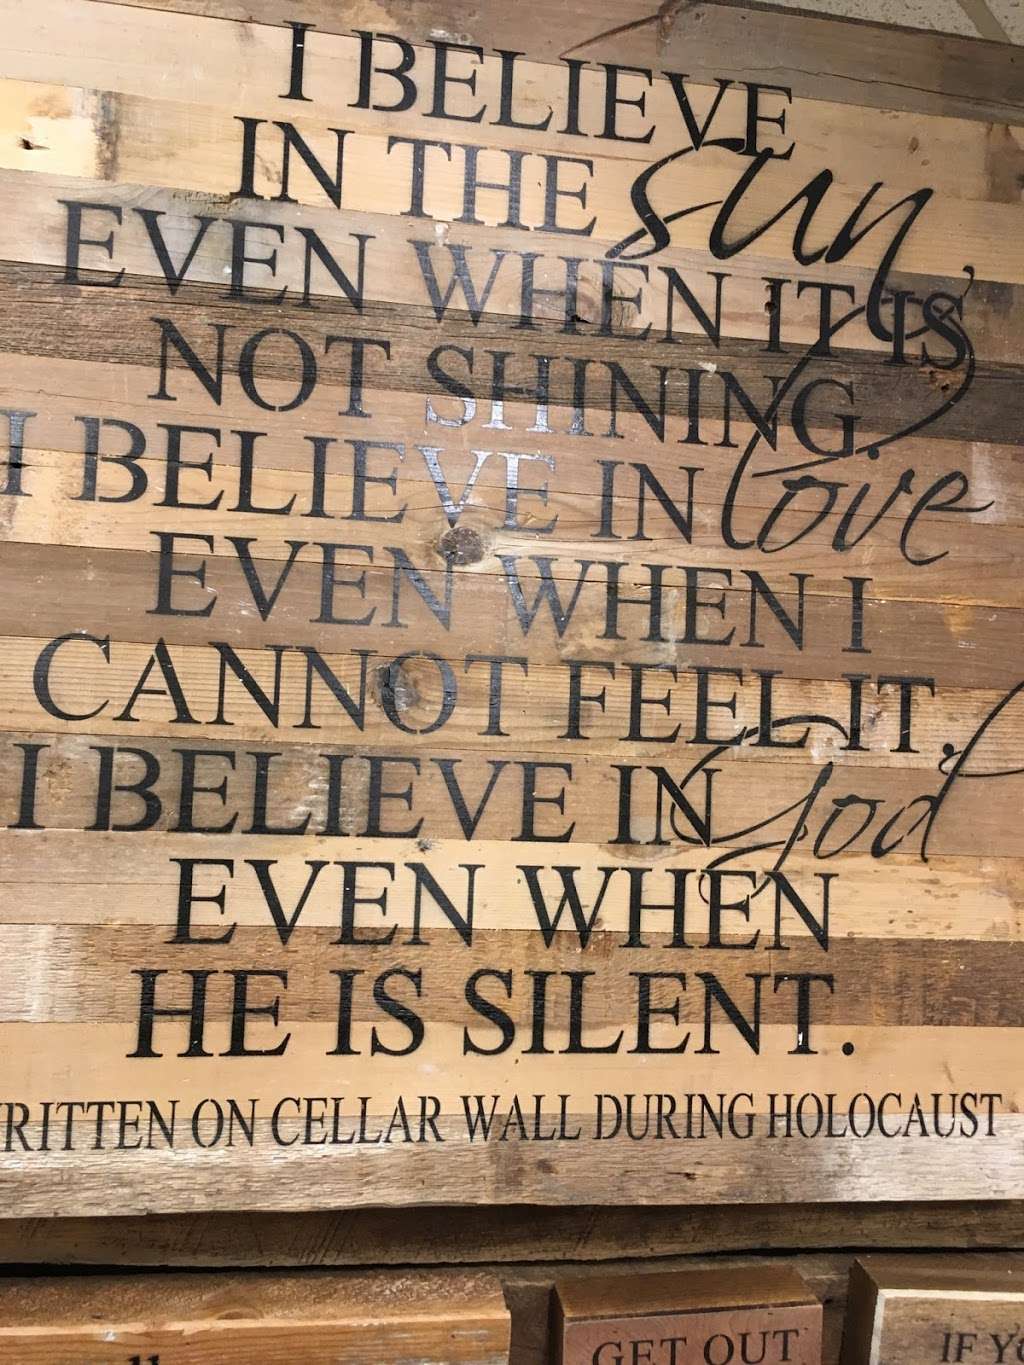 William R. Walls, LCSW-C * Reclaim Counseling, LLC | 8 S. Main Street Use rear alley entrance on, S Sunset Dr, Shrewsbury, PA 17361 | Phone: (717) 676-7085